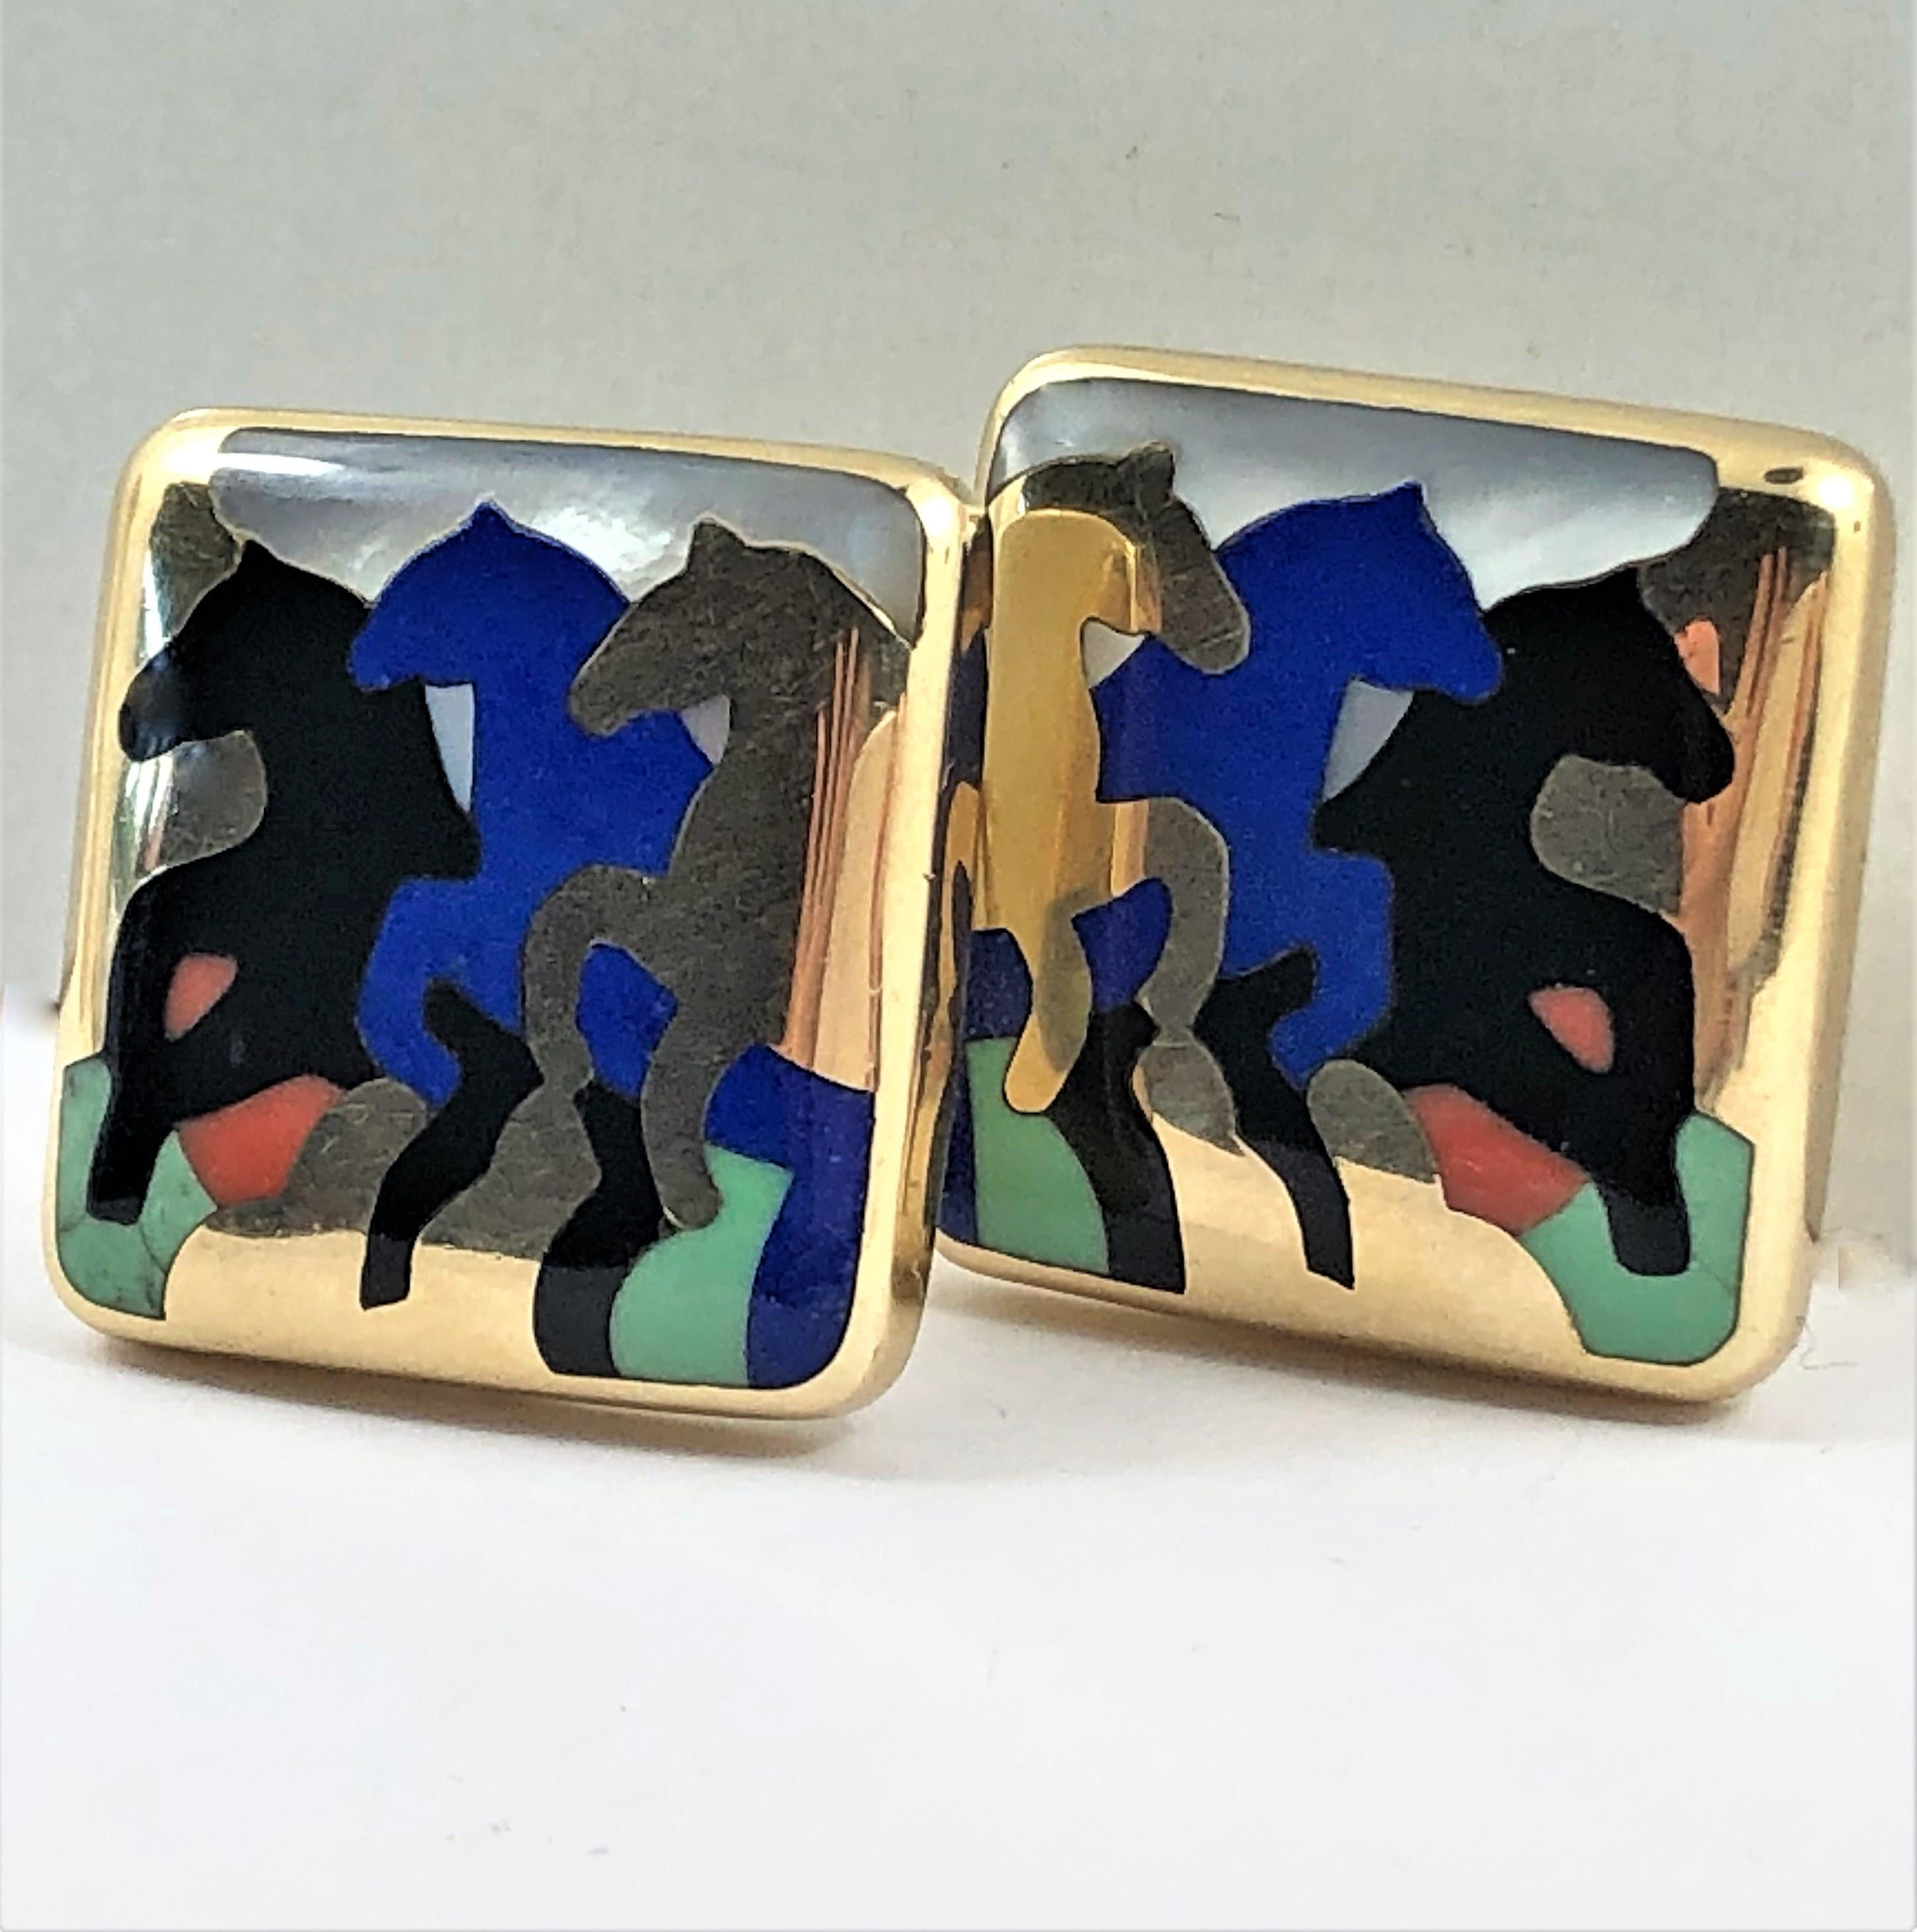 Made by Asch Grossbardt in 14K Yellow Gold, inlaid with hand cut and polished lapis lazuli, mother of pearl, aventurine, coral and onyx. Measuring 1 inch by 1 inch. With omega backs and posts. Gross weight 24 grams. Marks: AG Asch Grossbardt